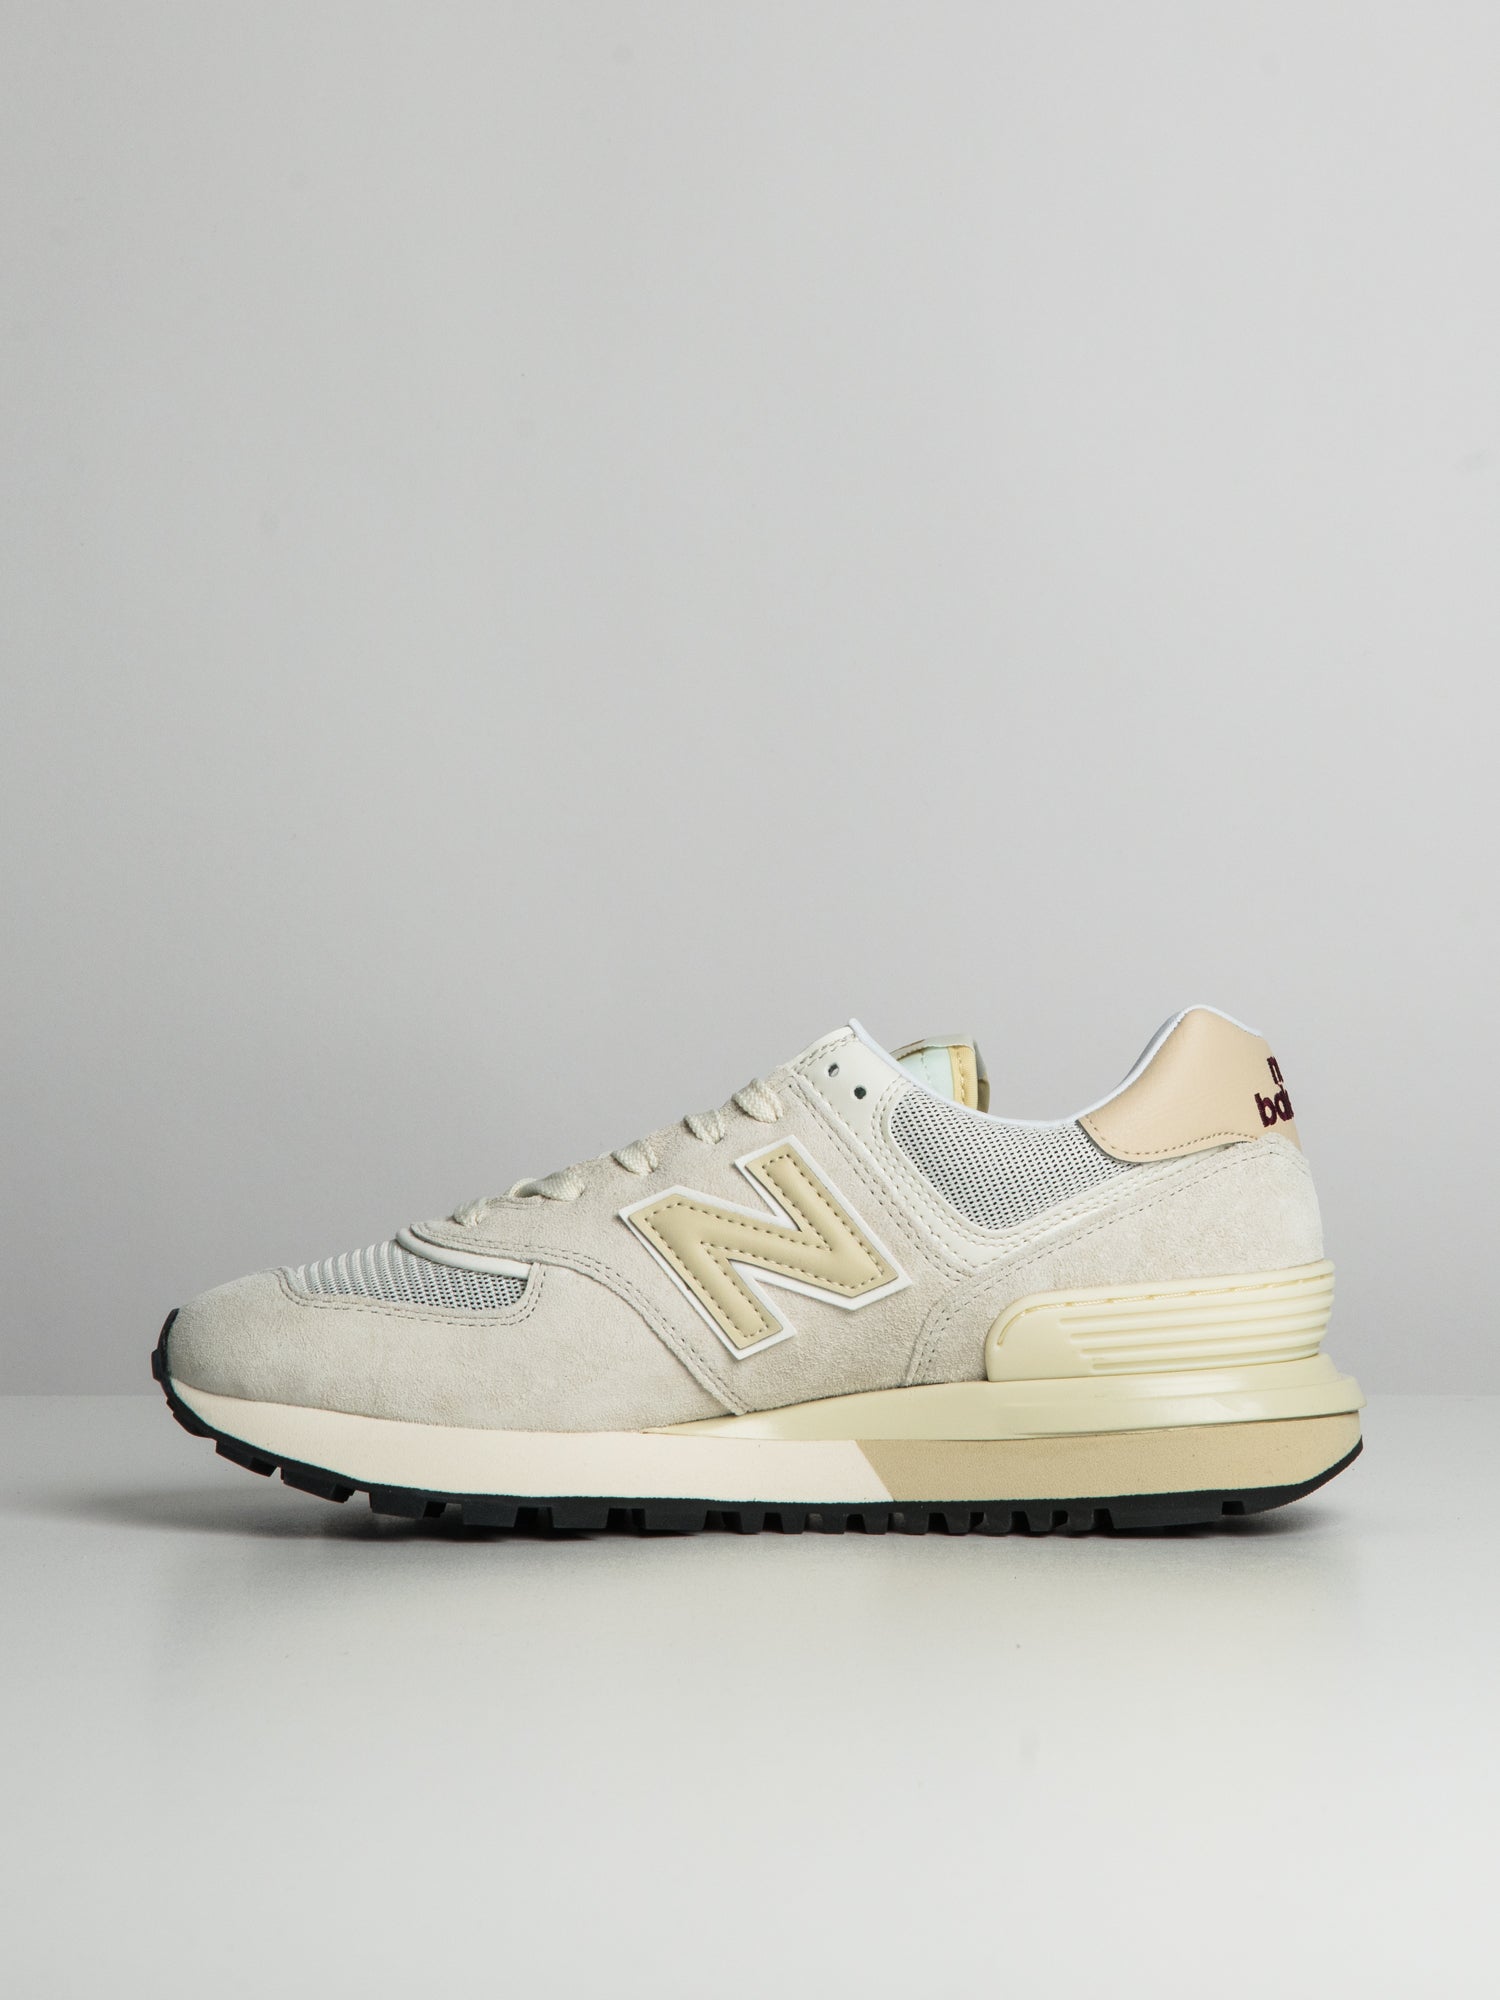 MENS NEW BALANCE THE 574 LEGACY - CLEARANCE